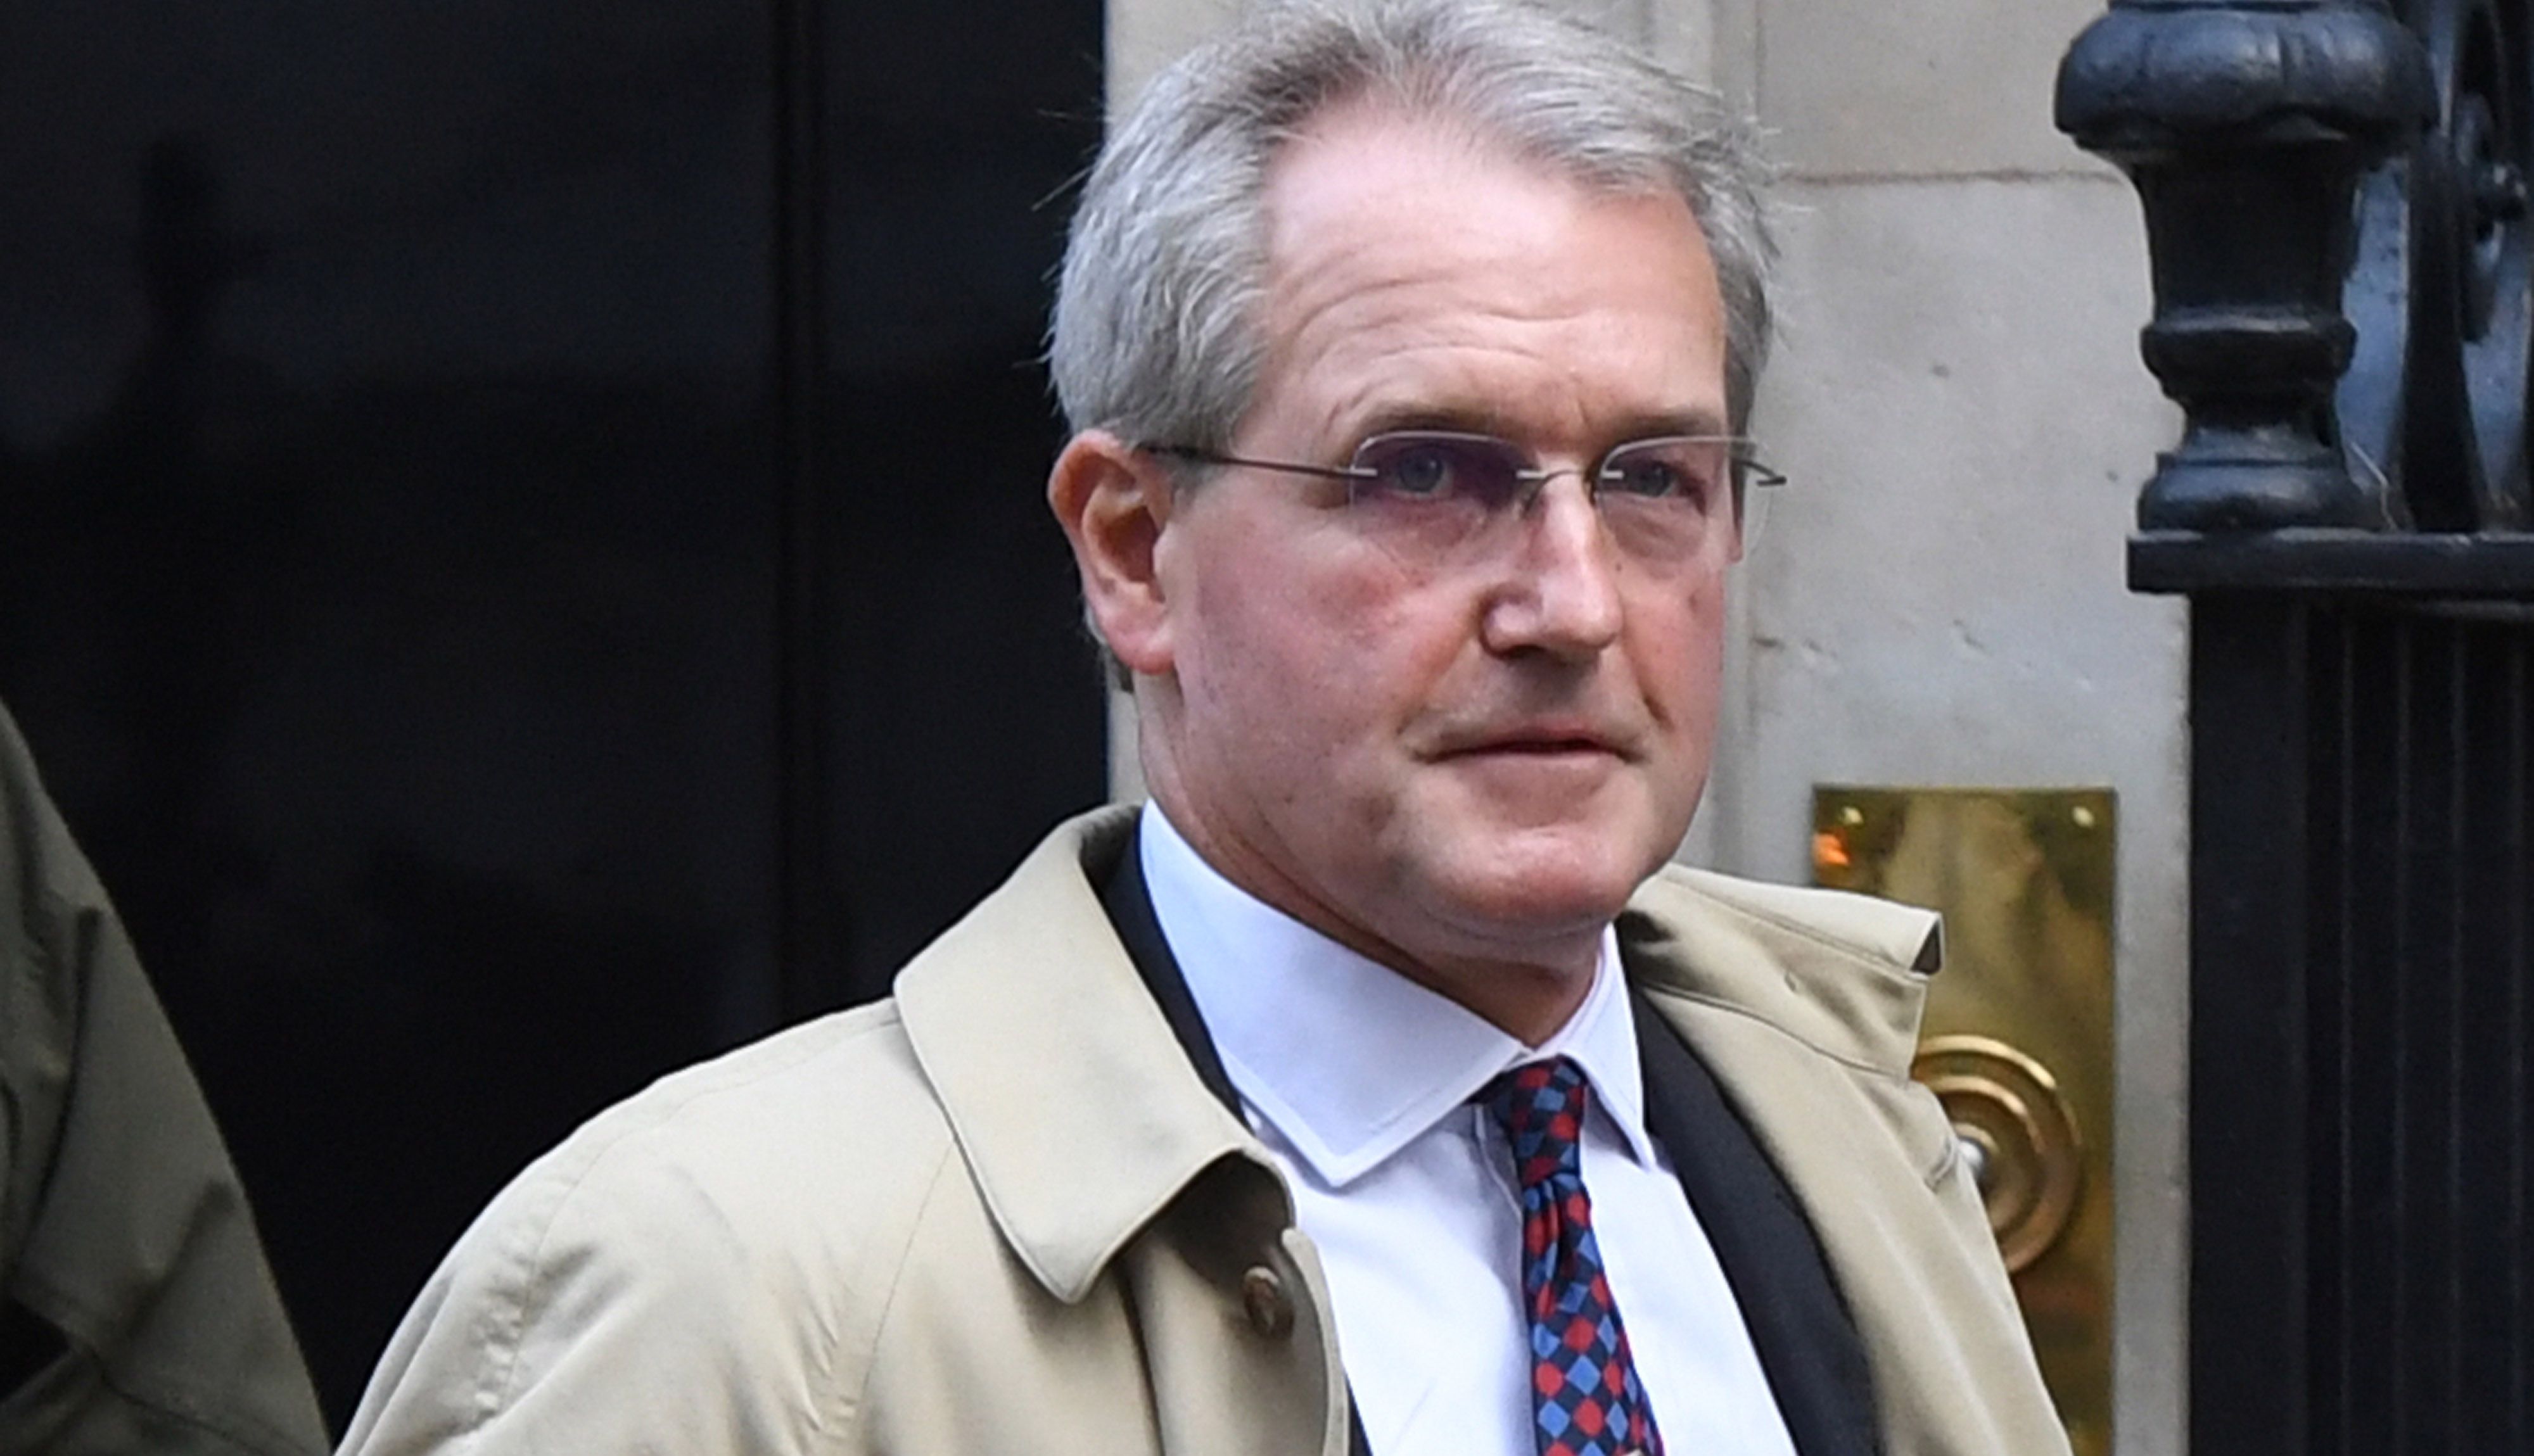 Owen Paterson resigned as the MP for North Shropshire.